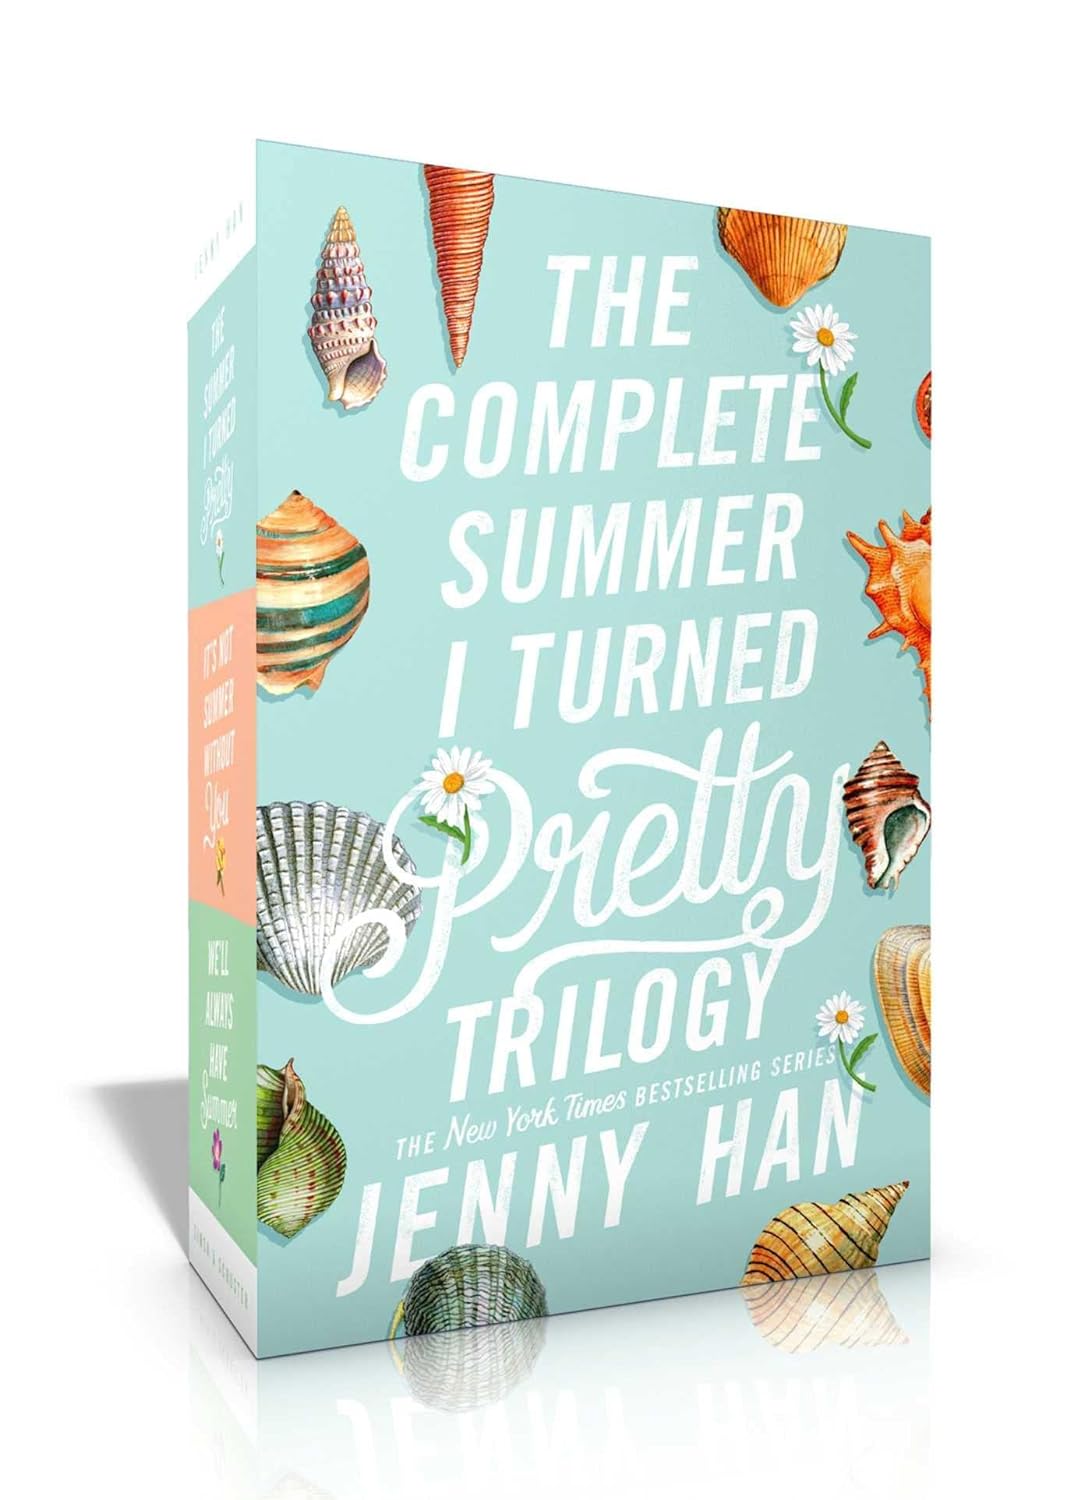 The best Christmas gift ideas for teen girls: The Complete Summer I Turned Pretty Trilogy